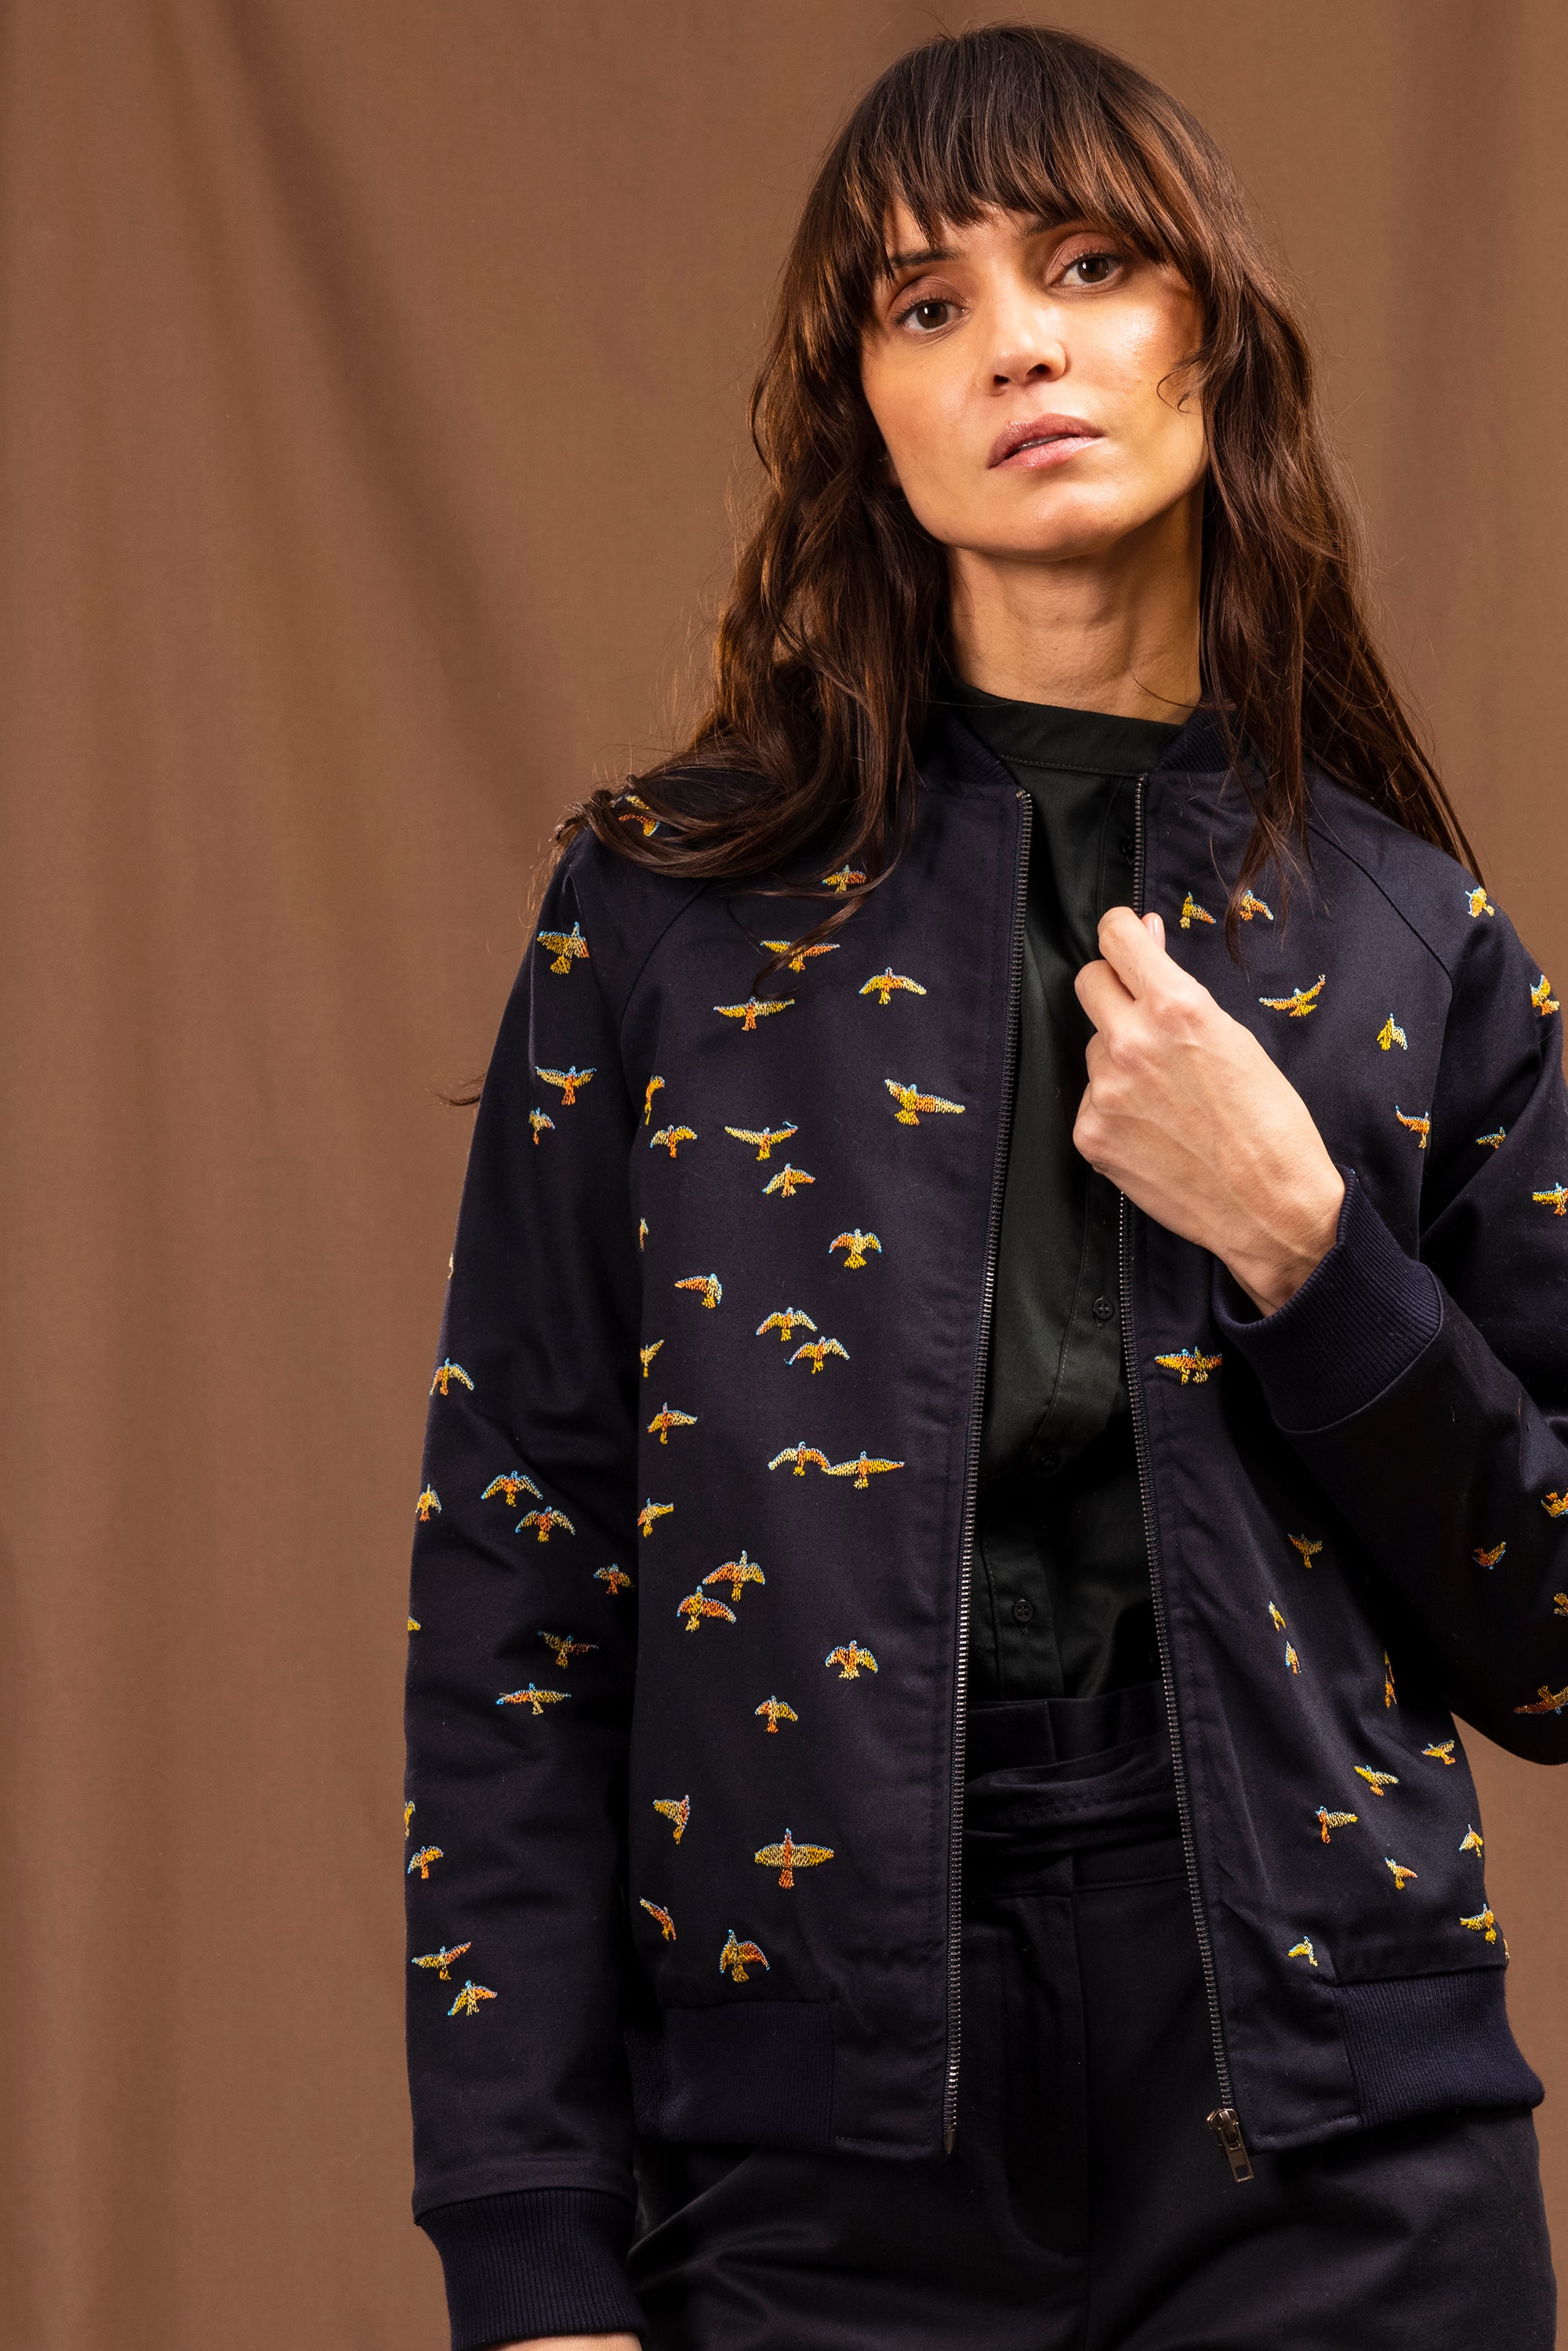 Navy blue zipped jacket with all-over bird embroidery